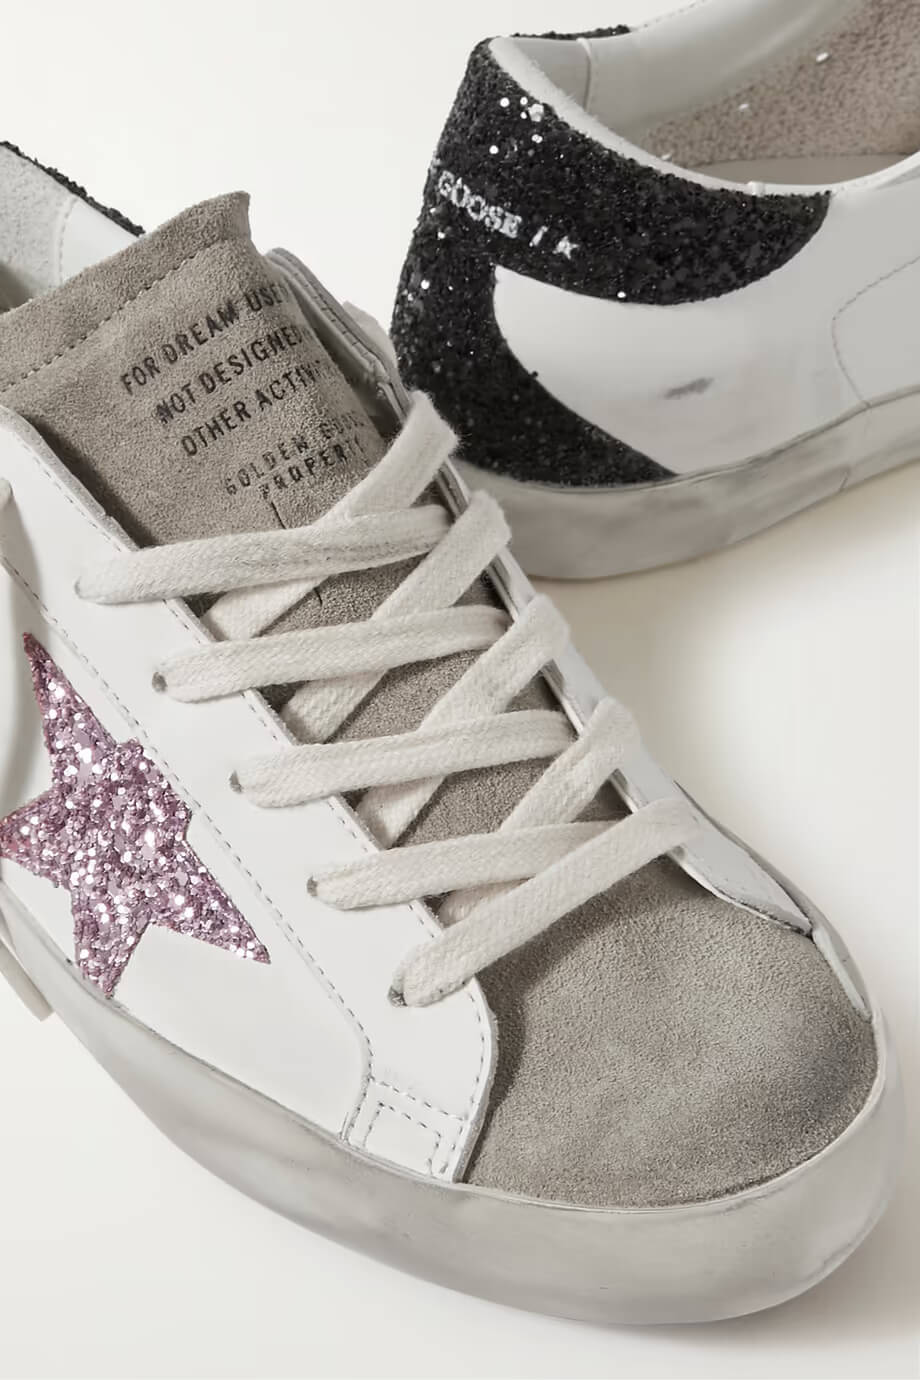 GOLDEN GOOSE Superstar Sneaker in Cream/Taupe/Mauve/Pink/Black available at TNT The New Trend Australia.